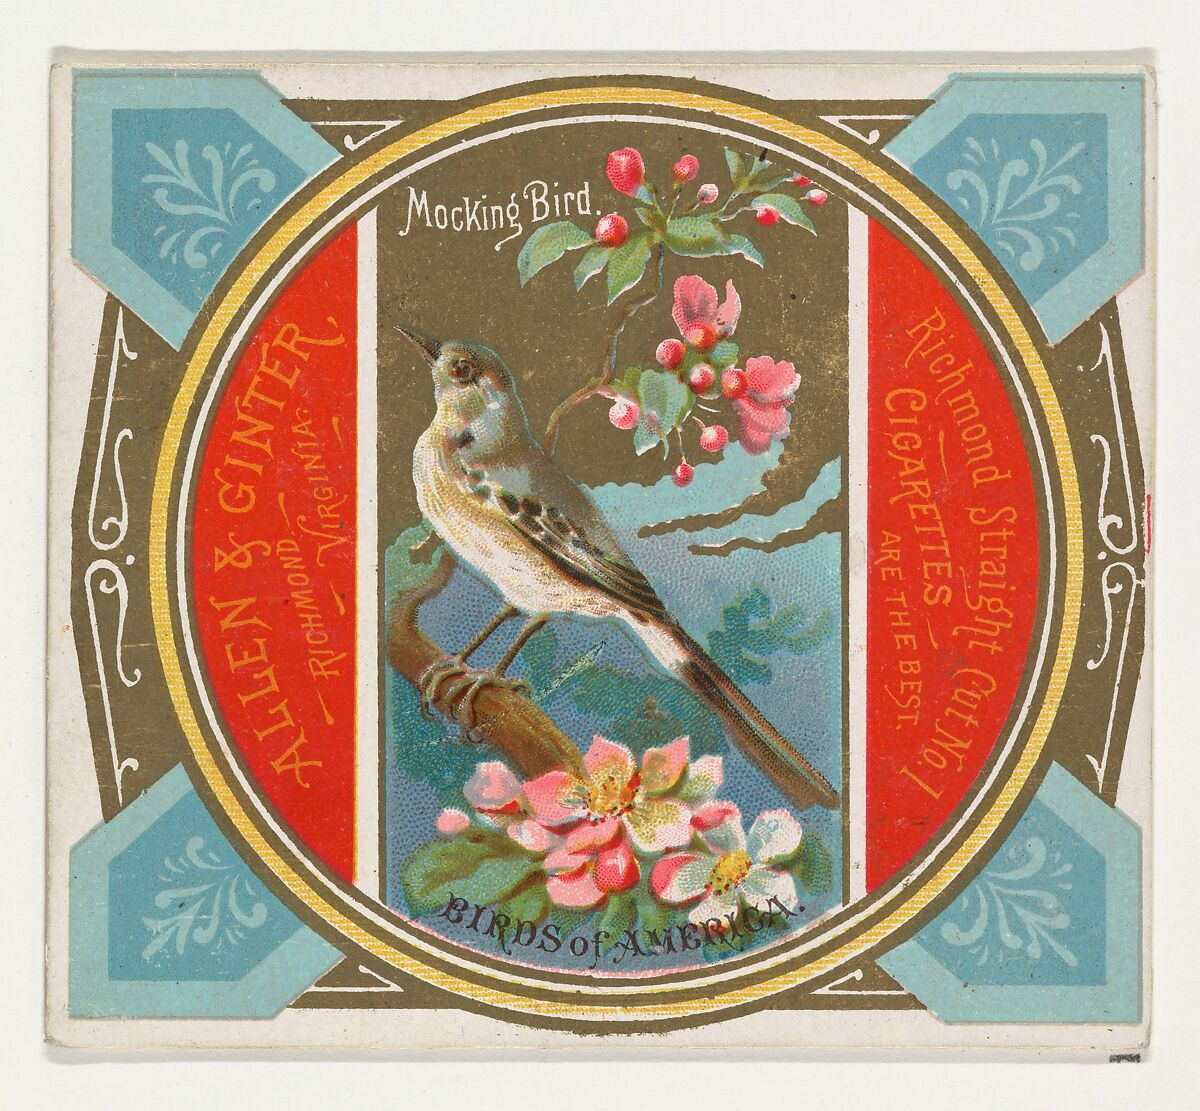 Mockingbird, from the Birds of America series (N37) for Allen & Ginter Cigarettes, Issued by Allen &amp; Ginter (American, Richmond, Virginia), Commercial color lithograph 